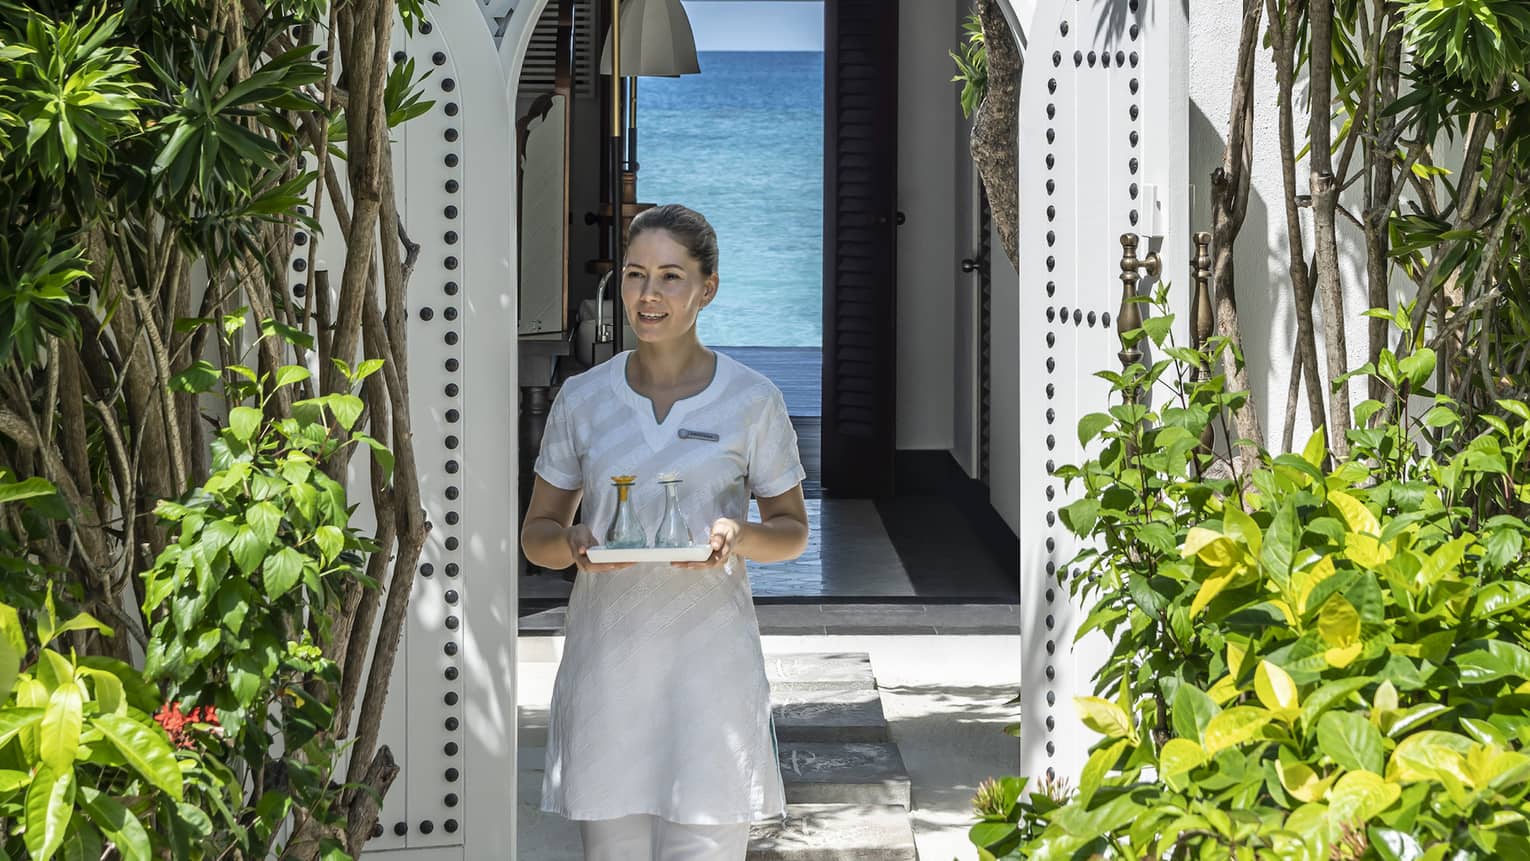 A four seasons spa member carries a tray of food through a shrubbery lined archway 